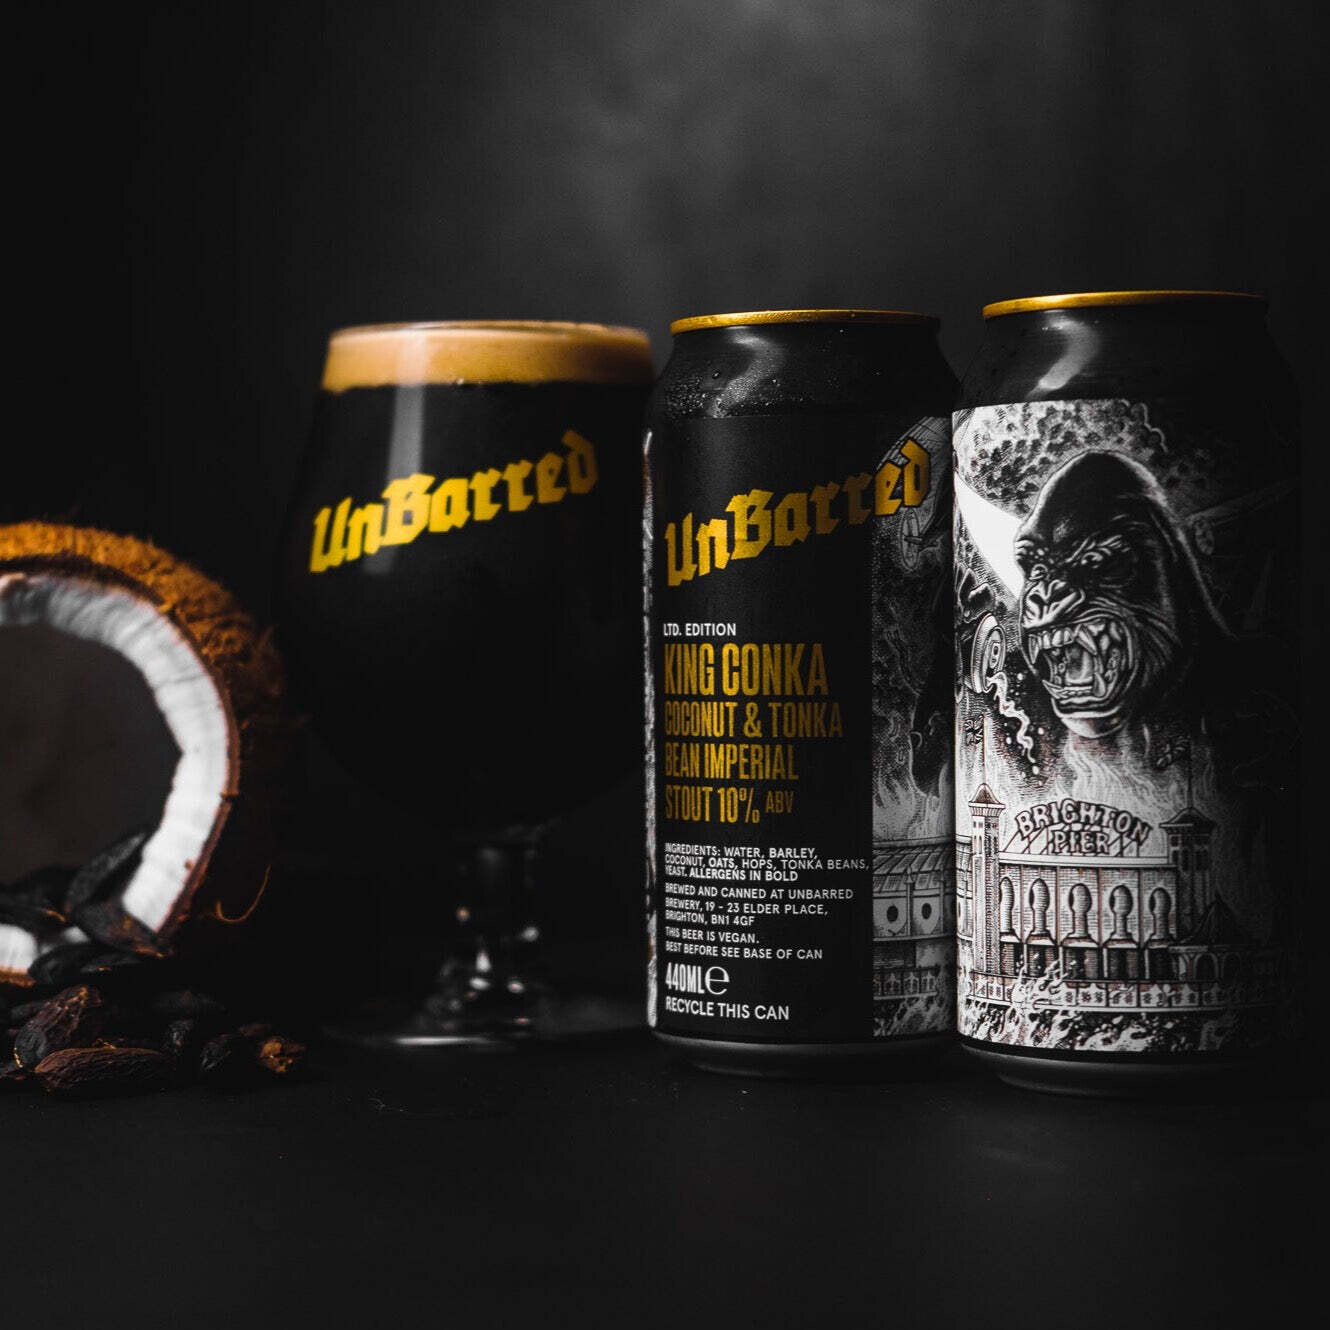 UnBarred King Conka Imperial Stout